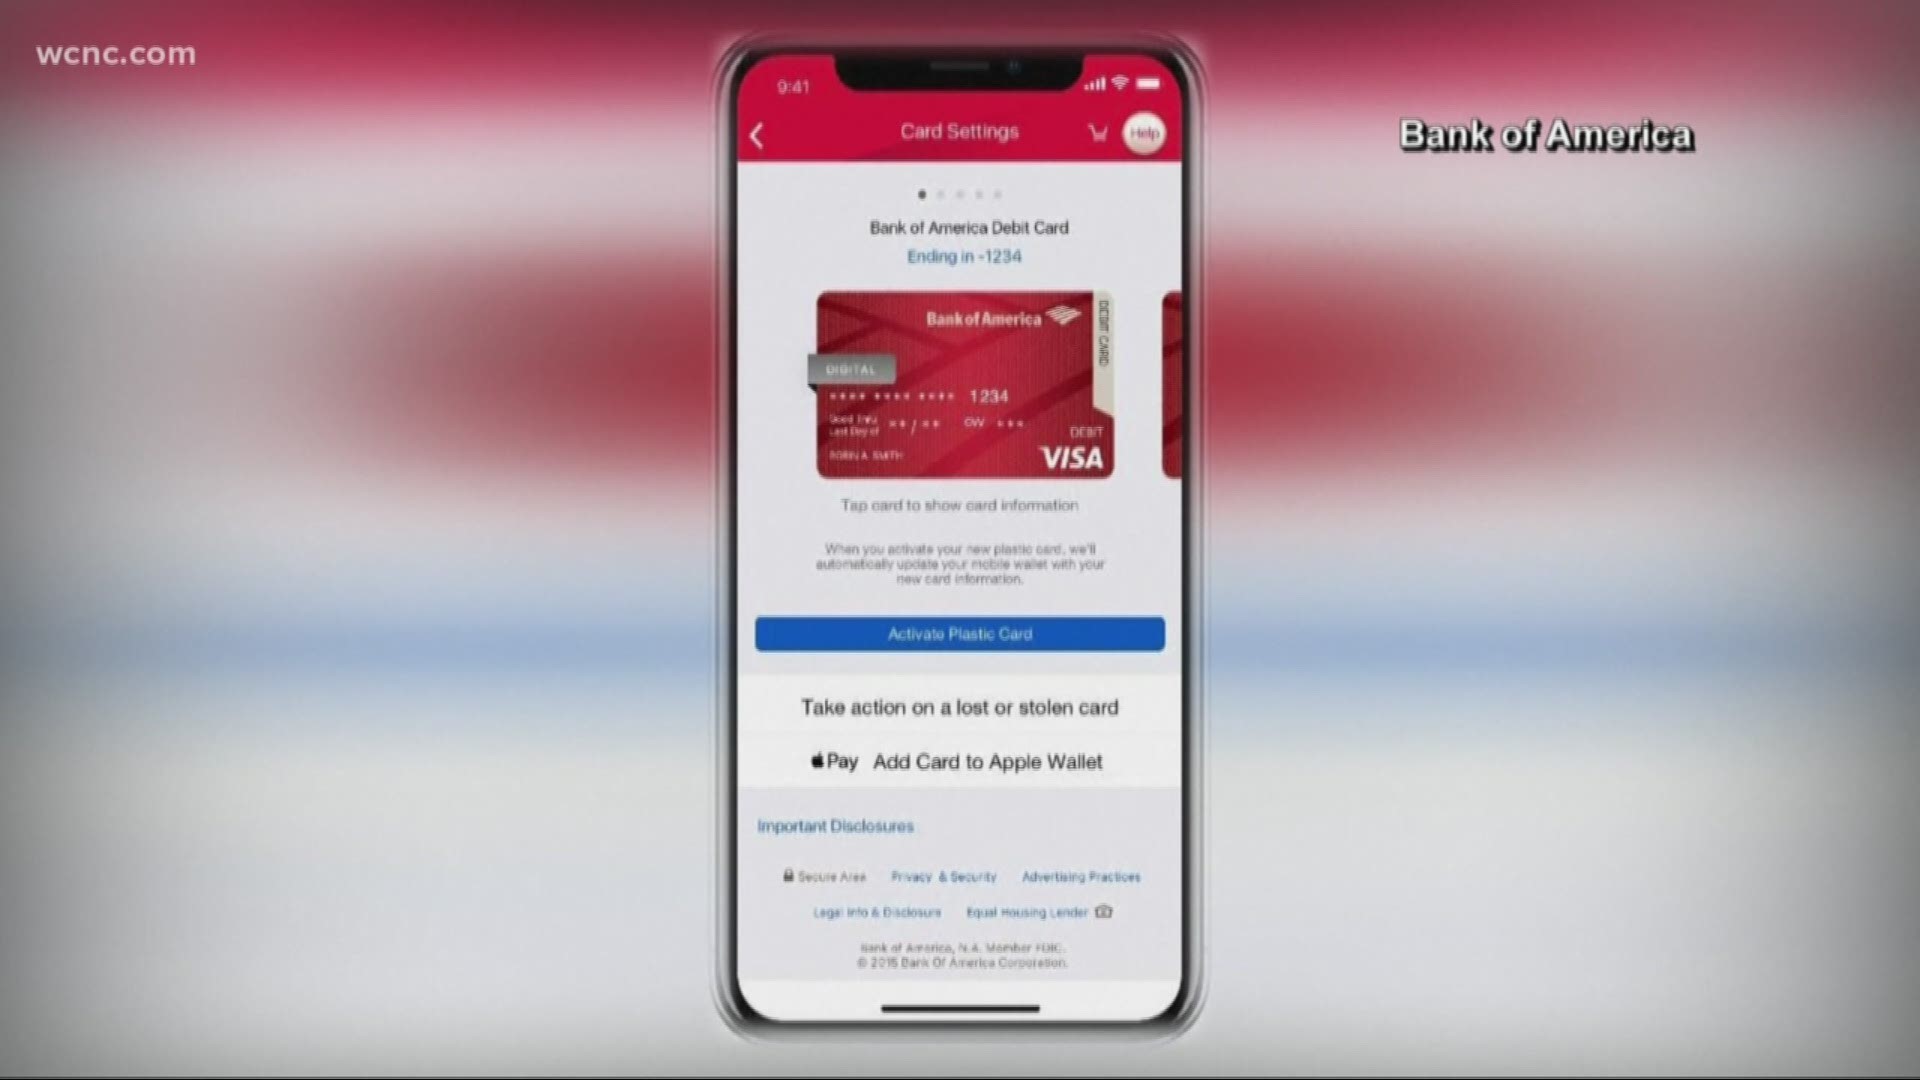 Using your funds electronically just got a lot easier for Bank of America customers. The Charlotte-based bank announced the new digital debit card customers can use through an app on their smartphone.